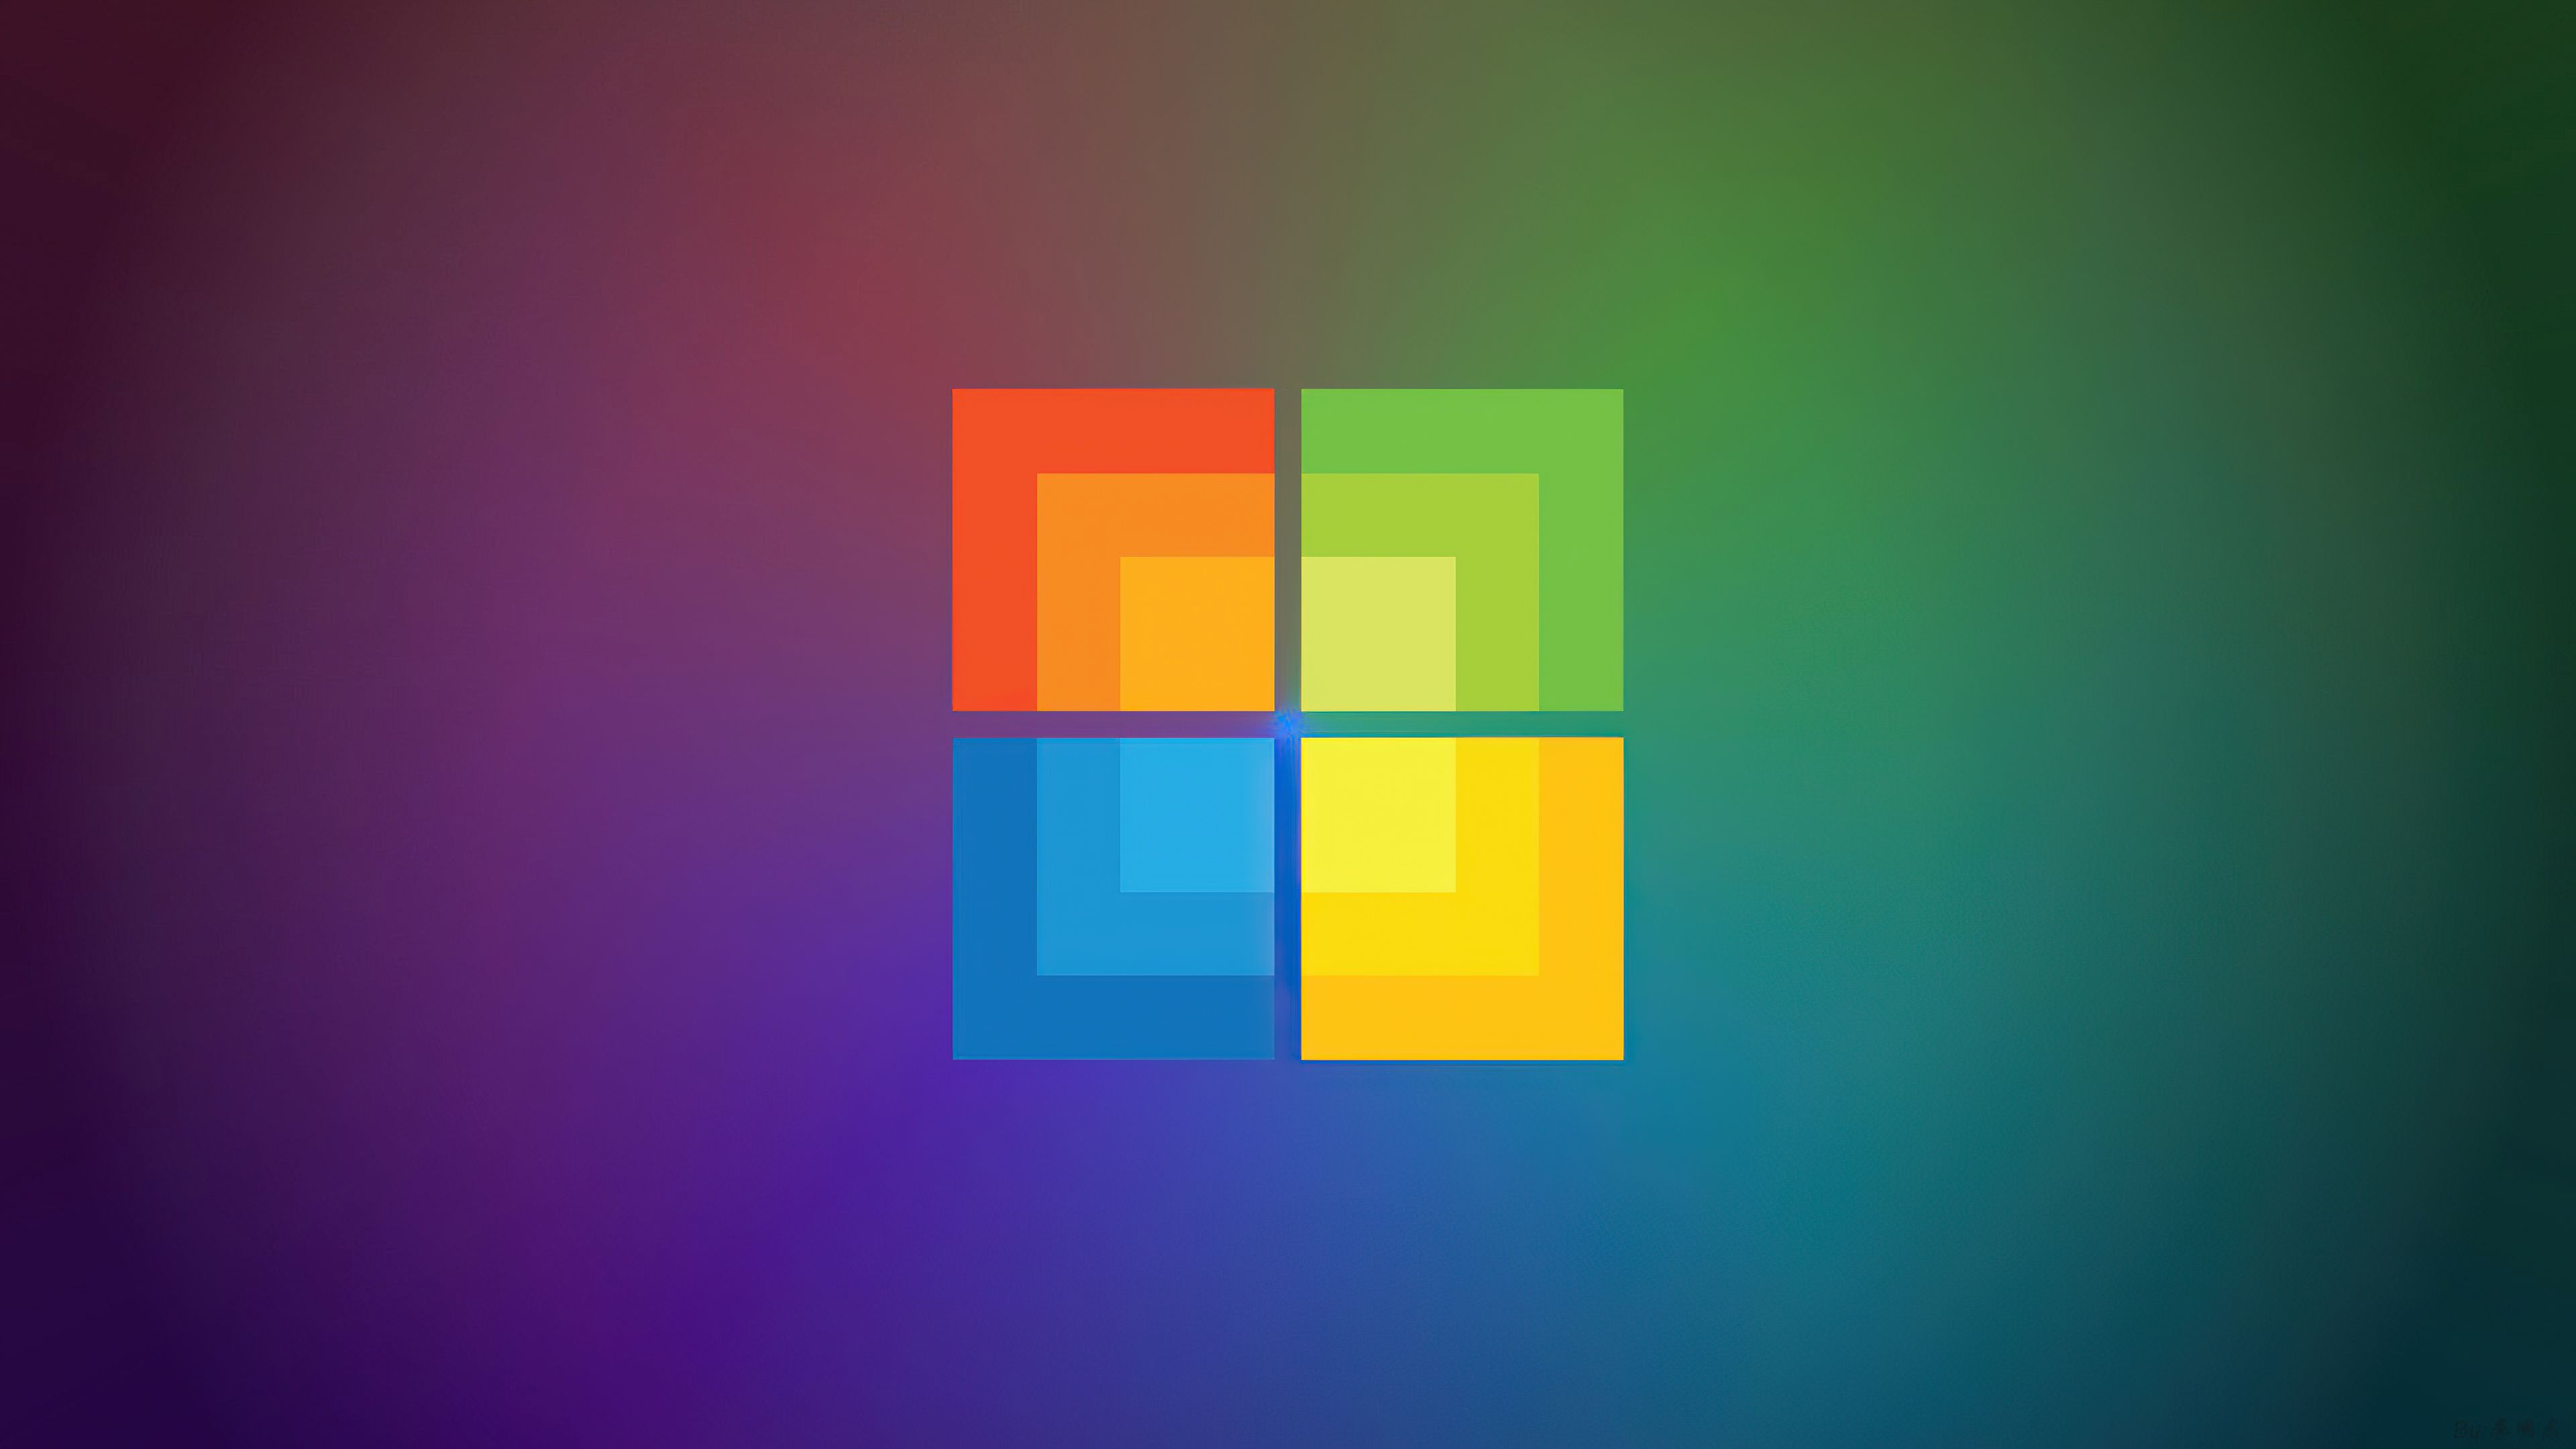 Windows 10 4K Wallpaper, Colorful, Gradient background, Technology